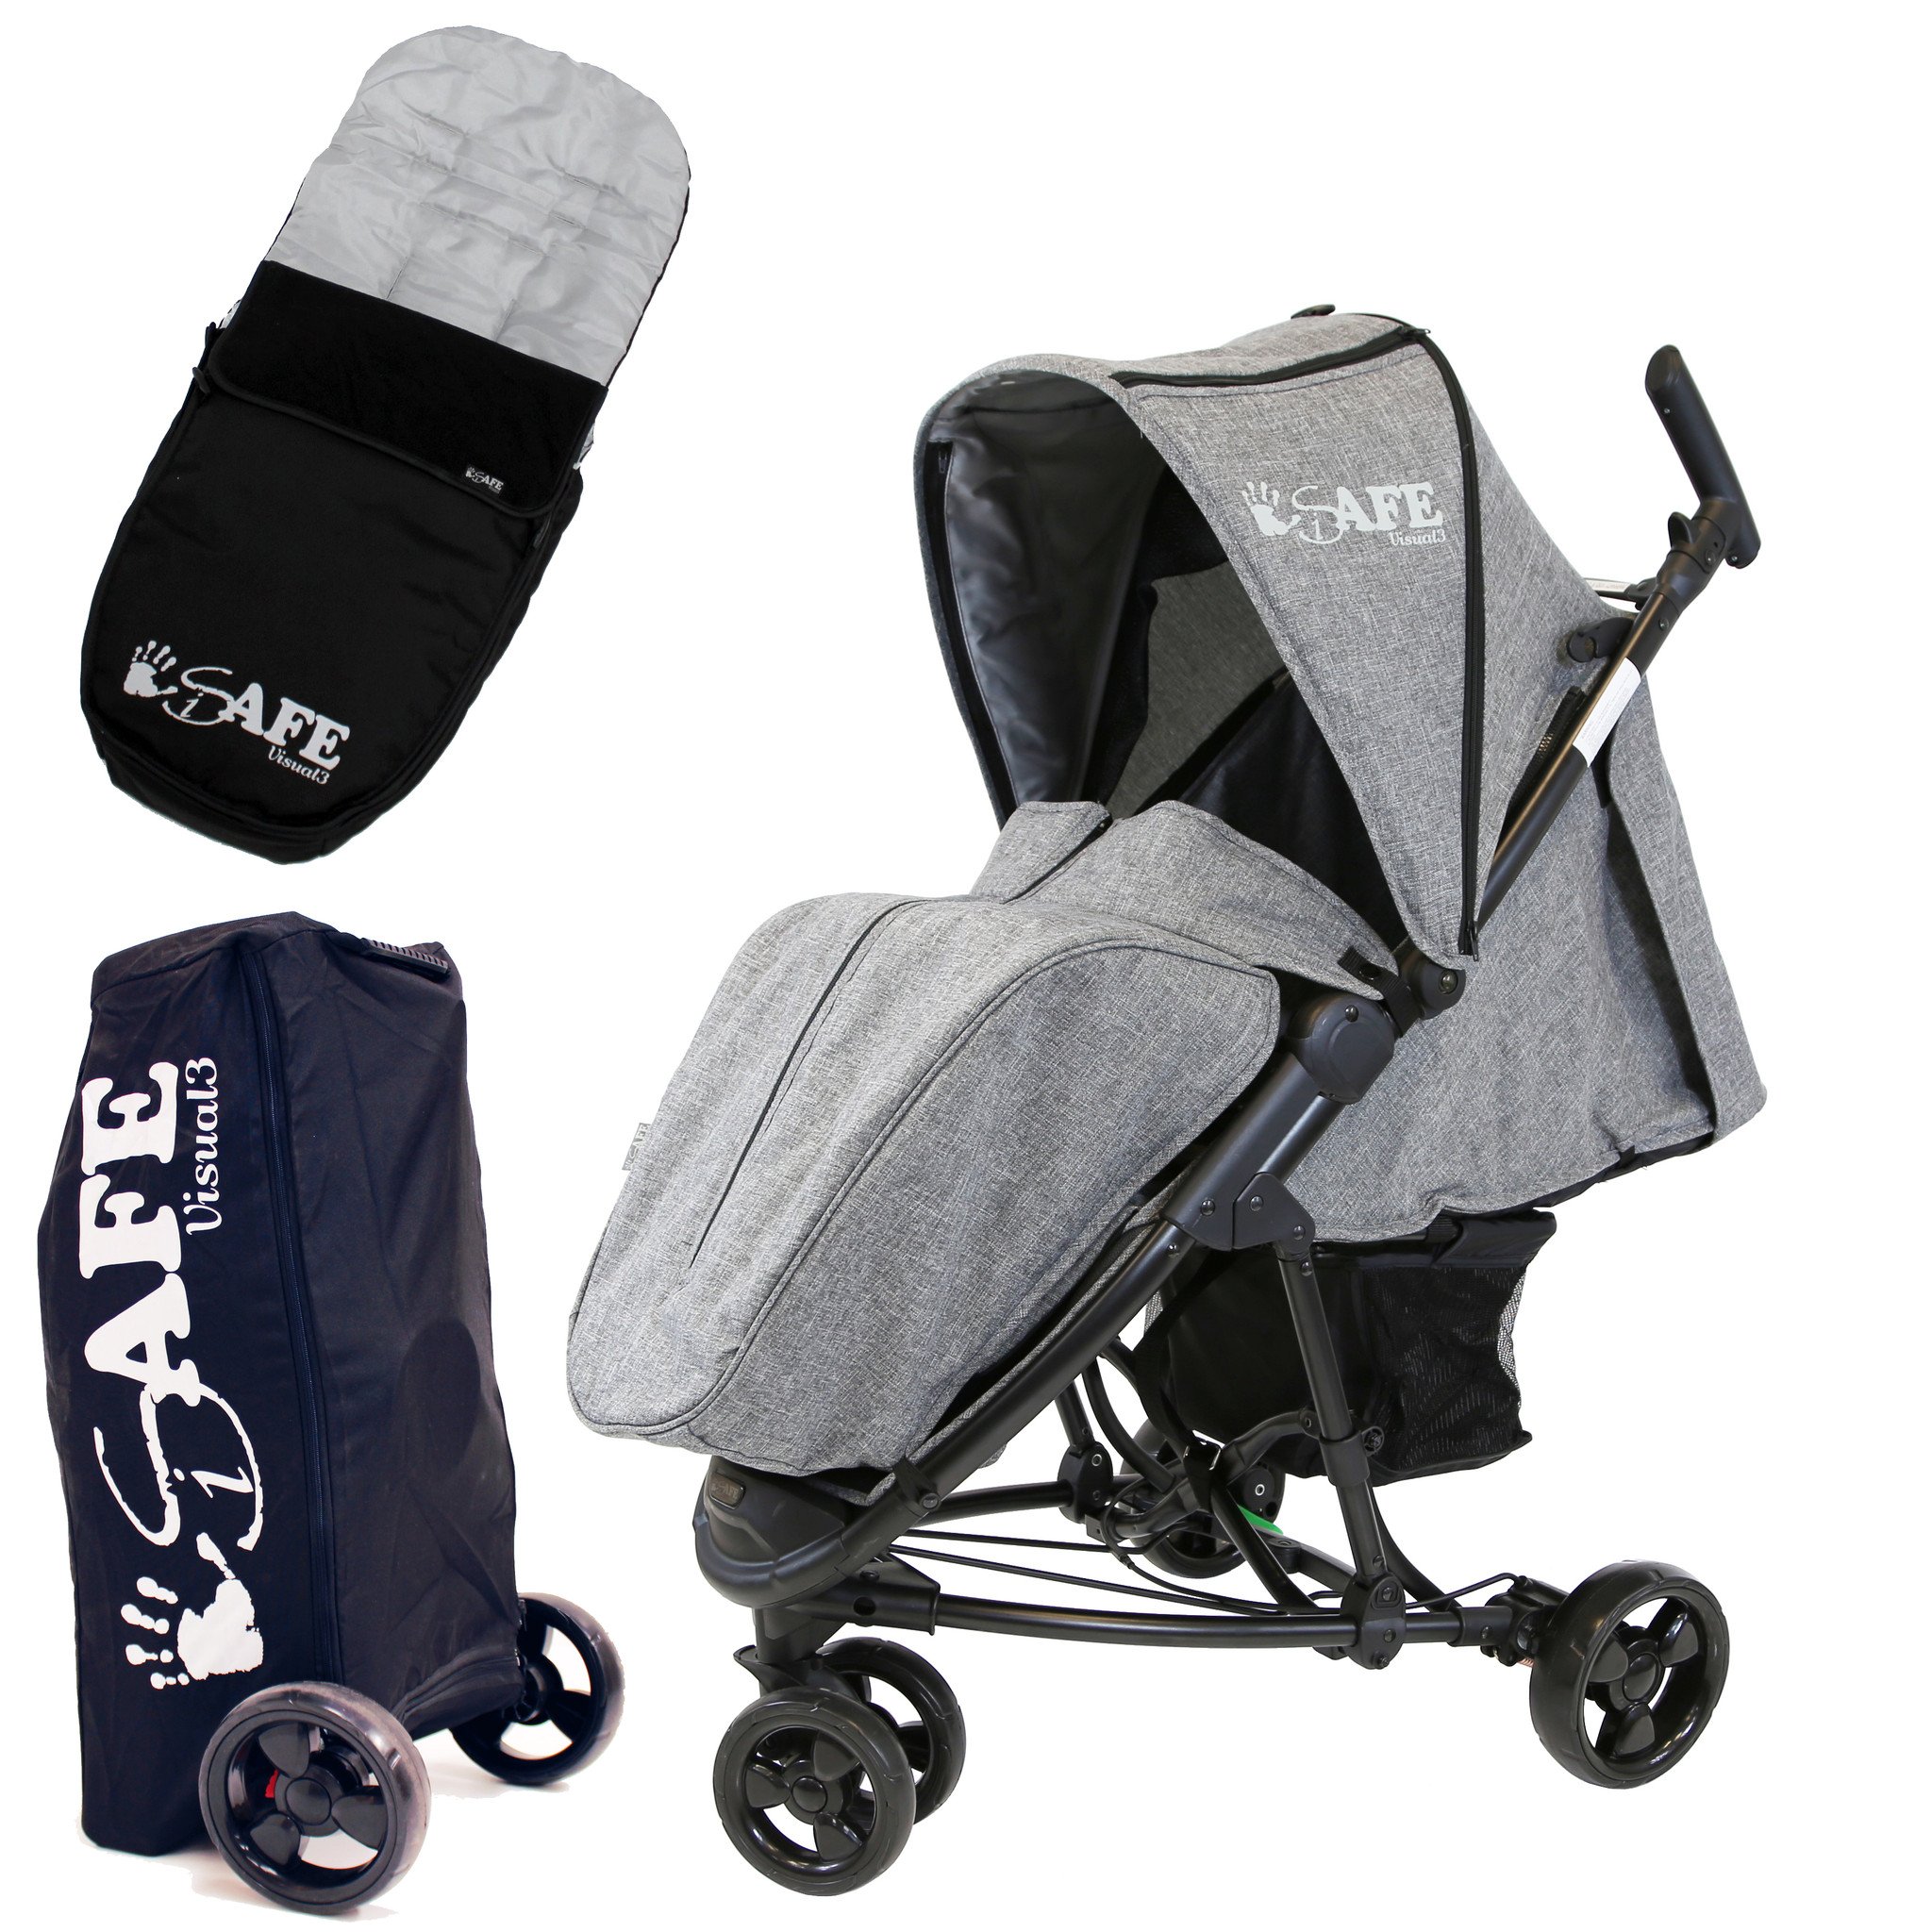 Welcome To Baby Travel LTD Exclusive British Designer And ...